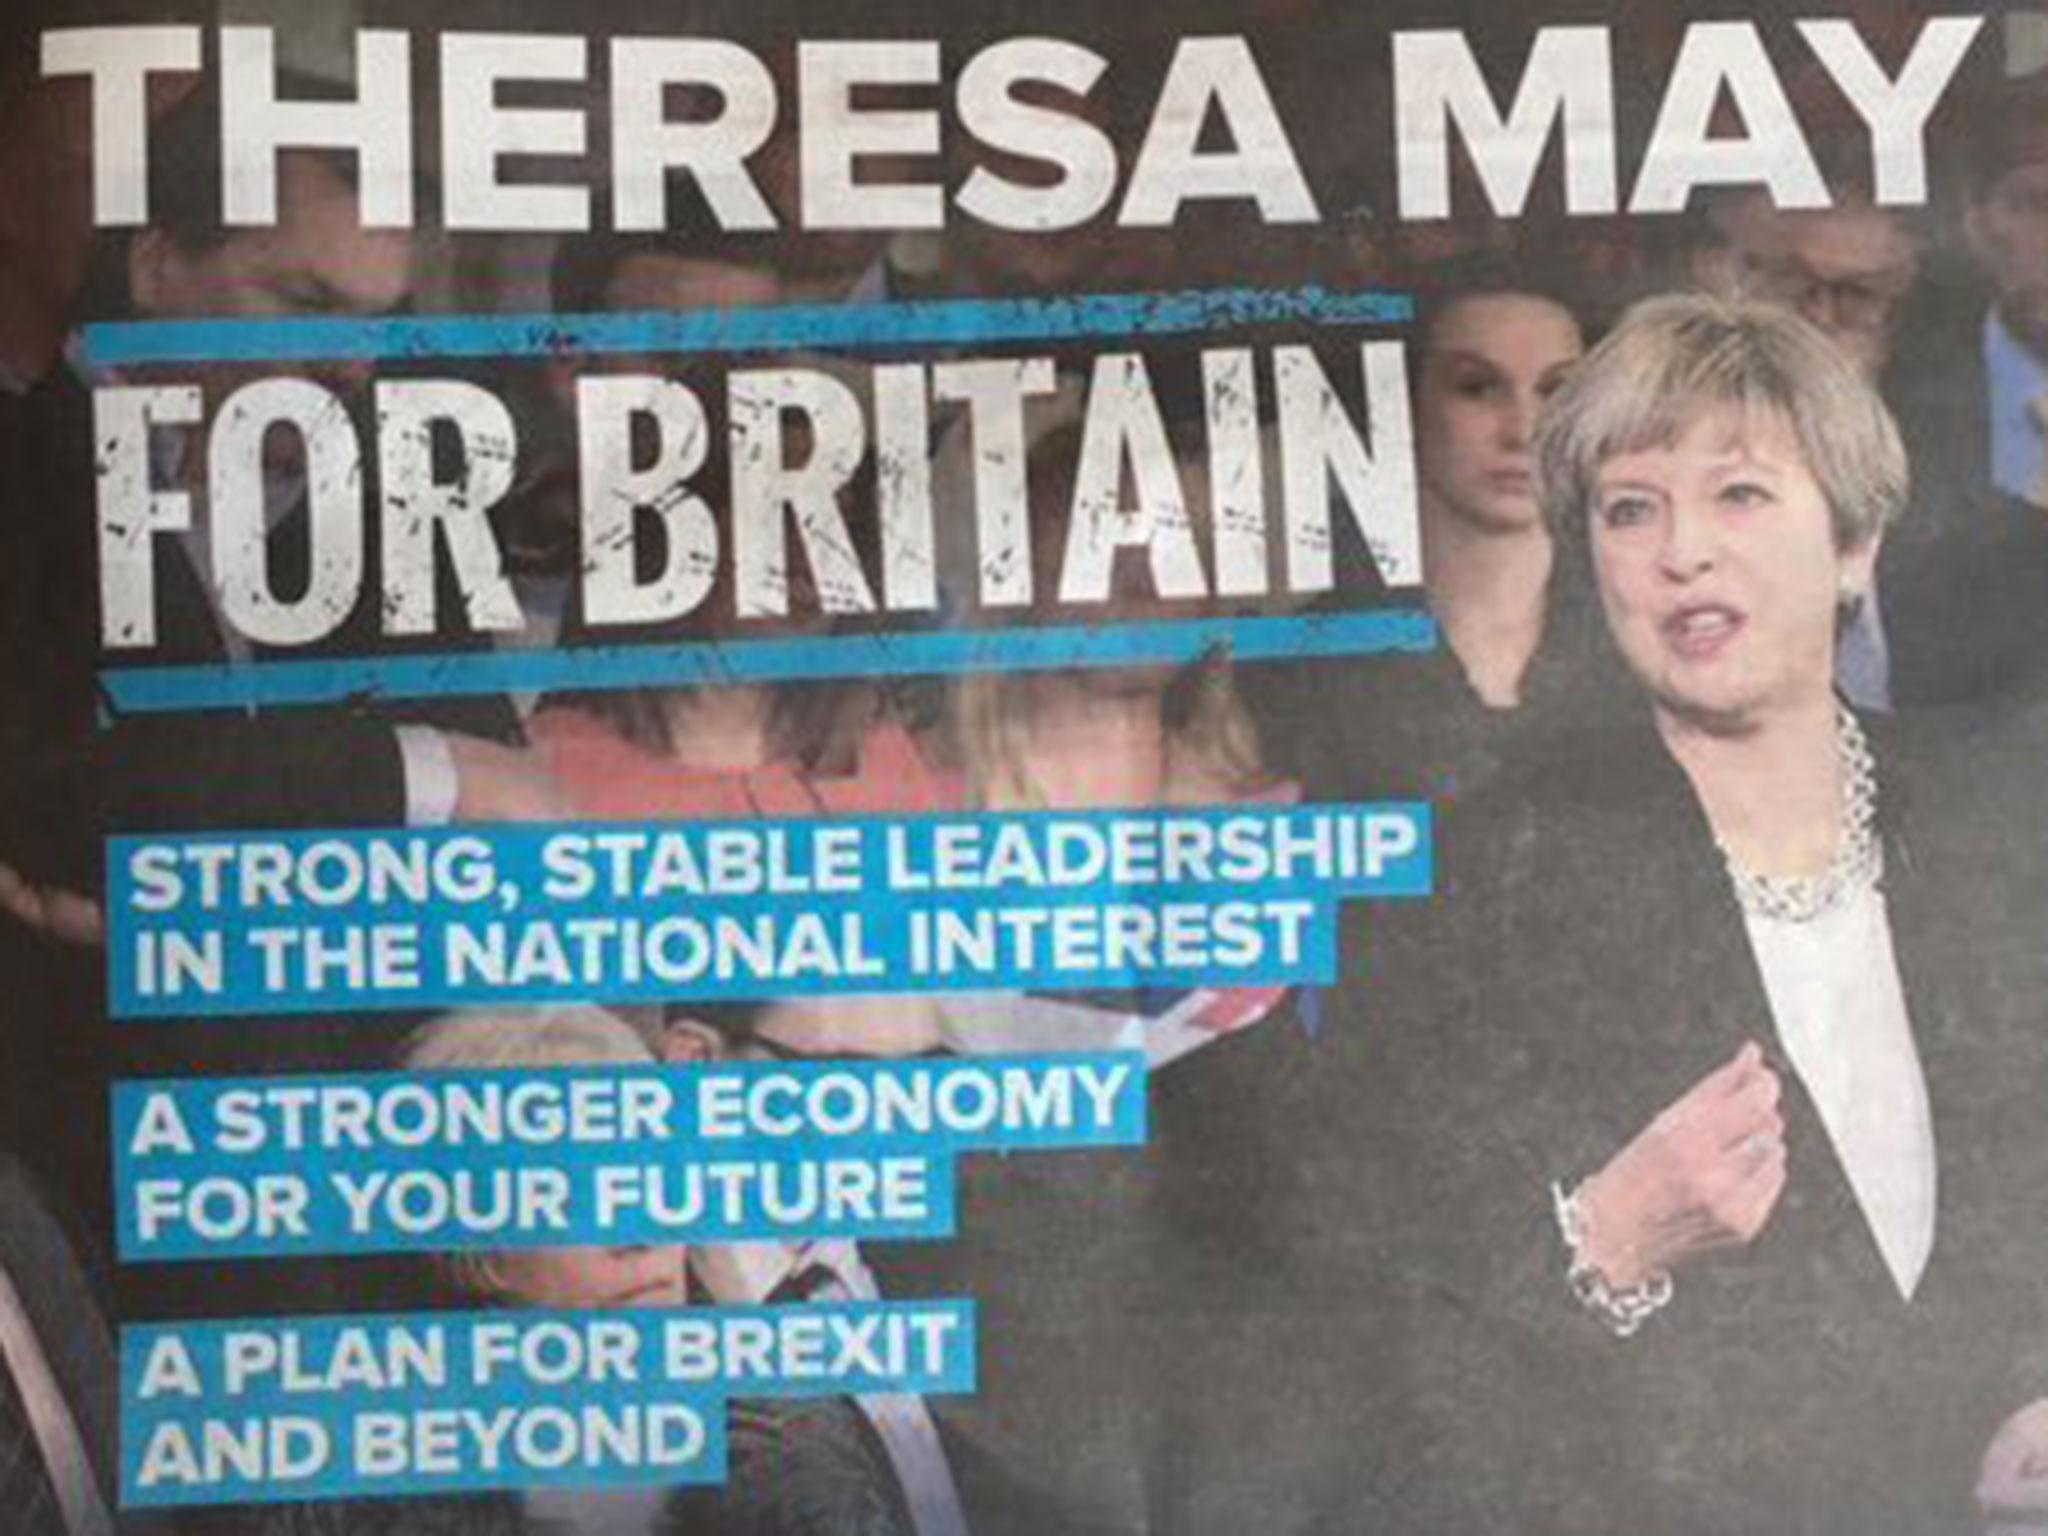 The Conservative advert published on the front of several weekly titles